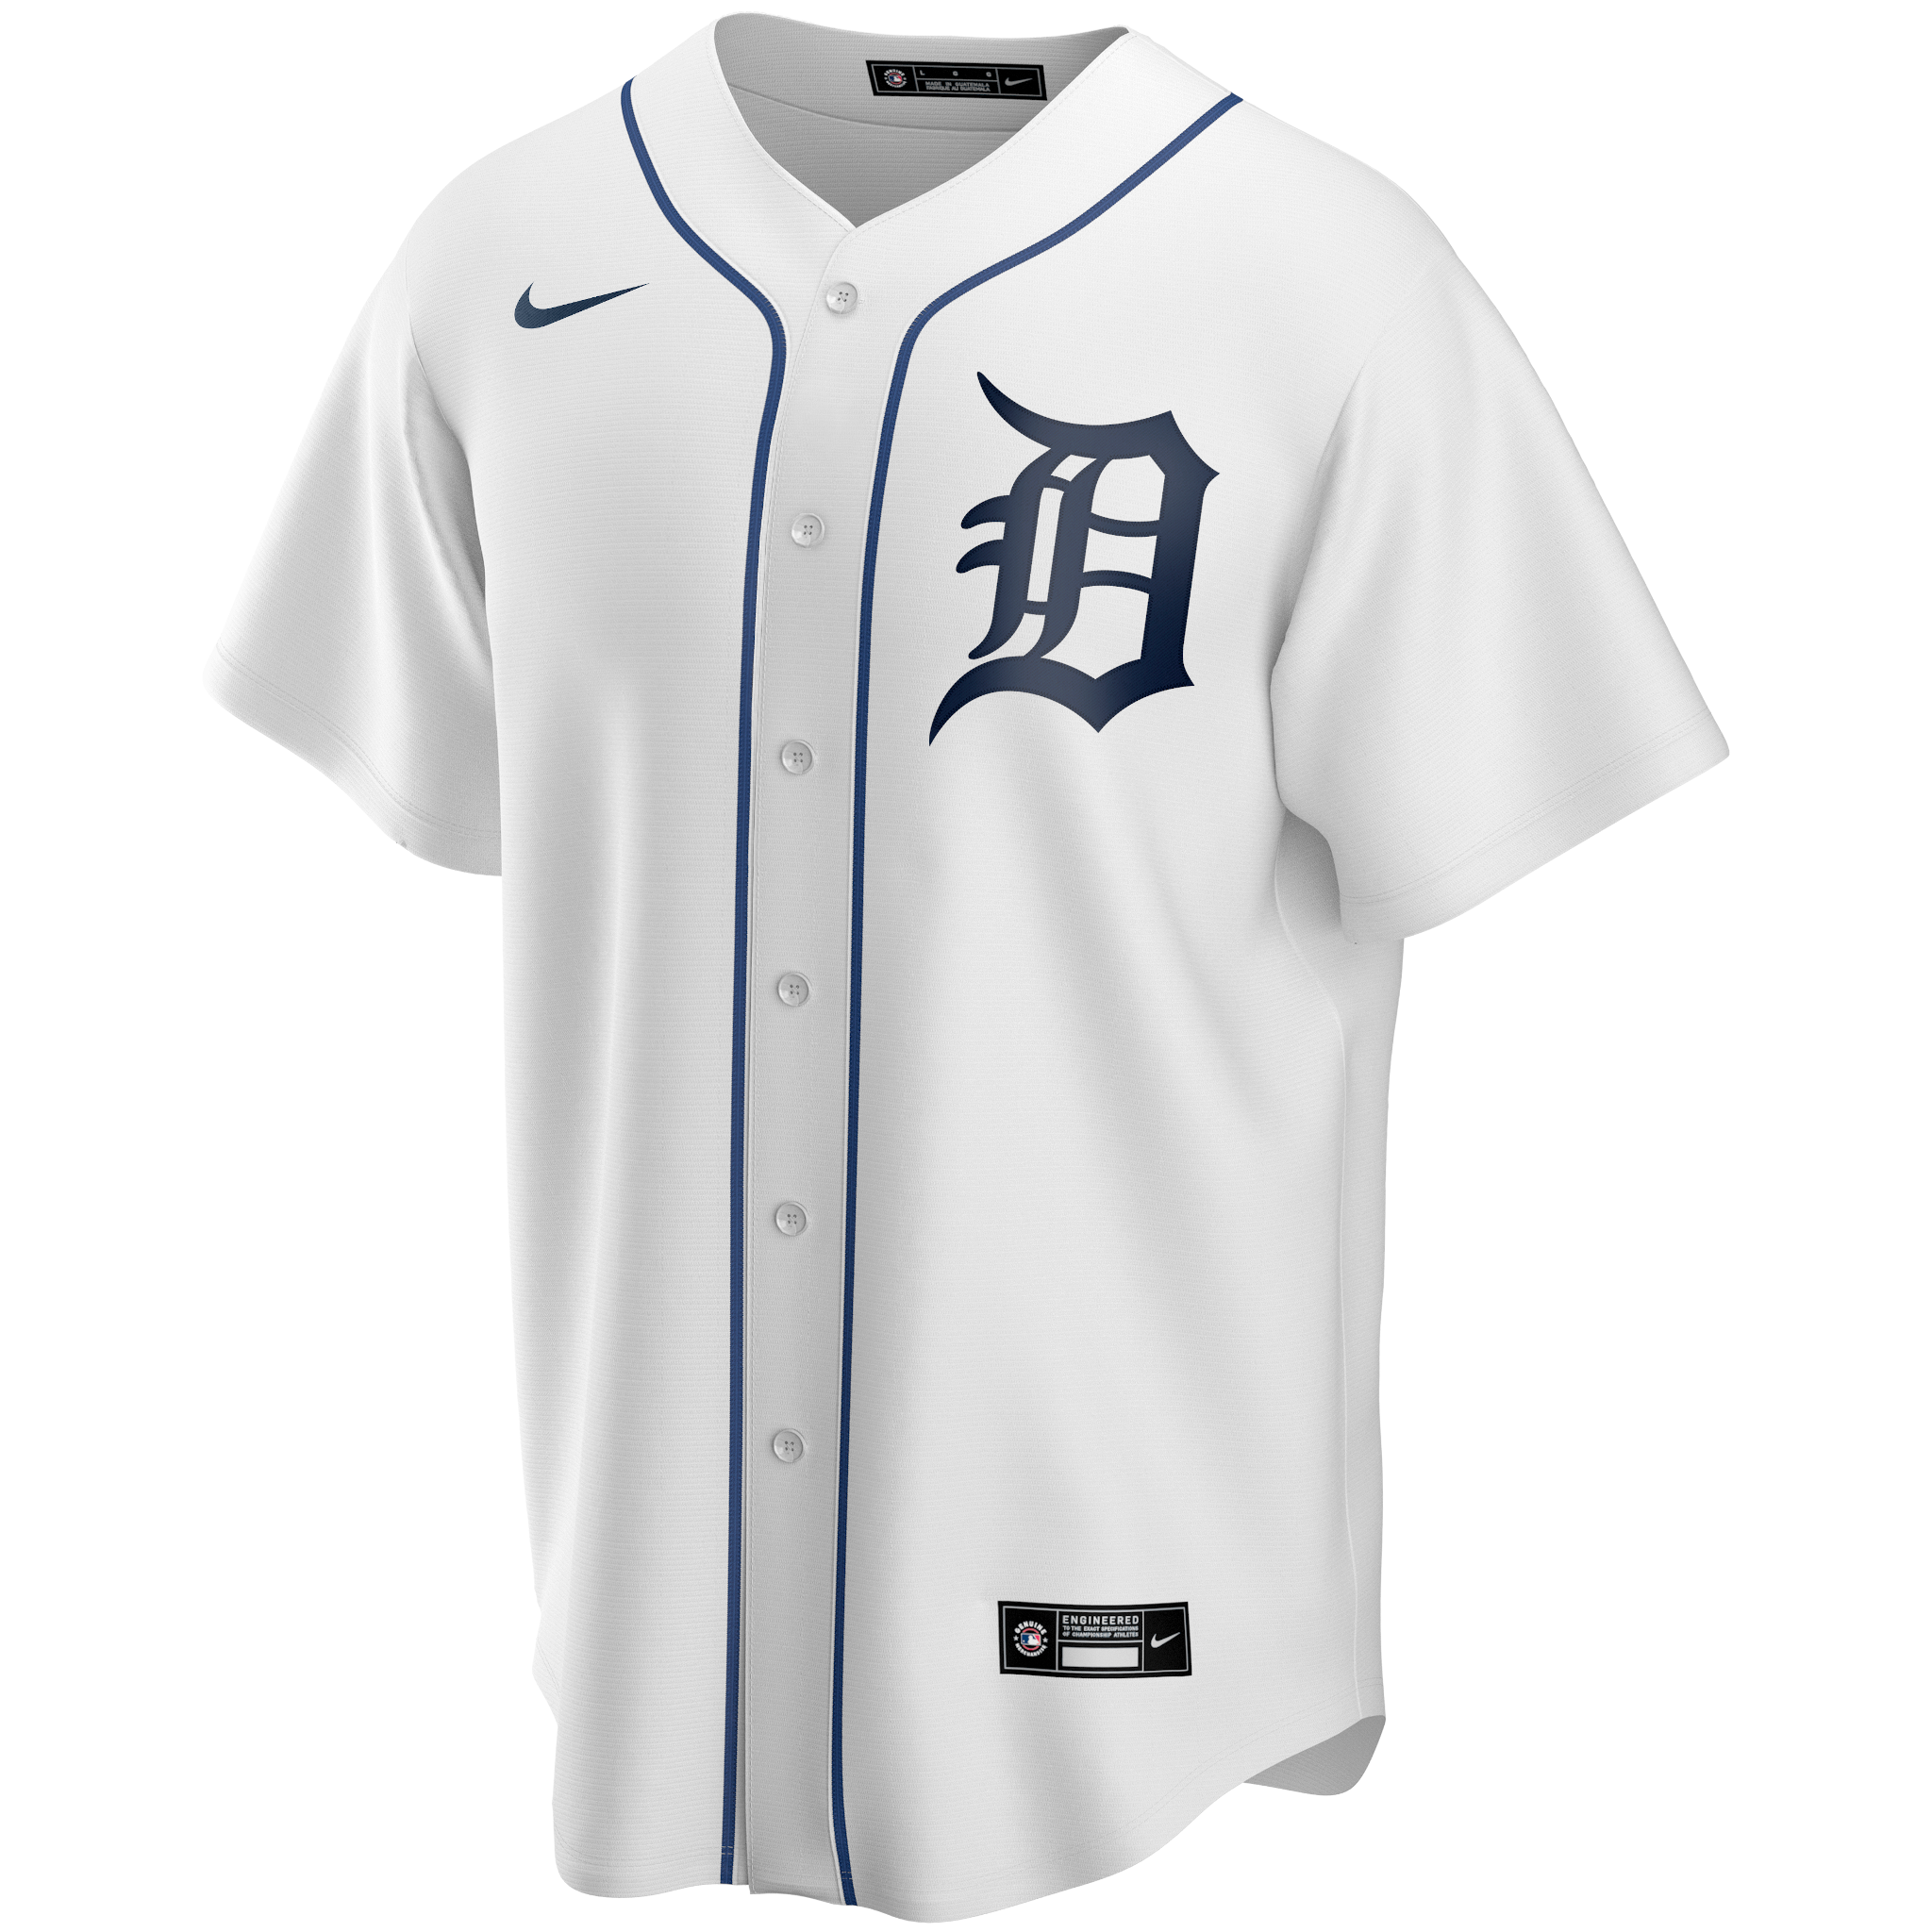 Detroit Tigers - The #Tigers will wear #42 to honor Jackie